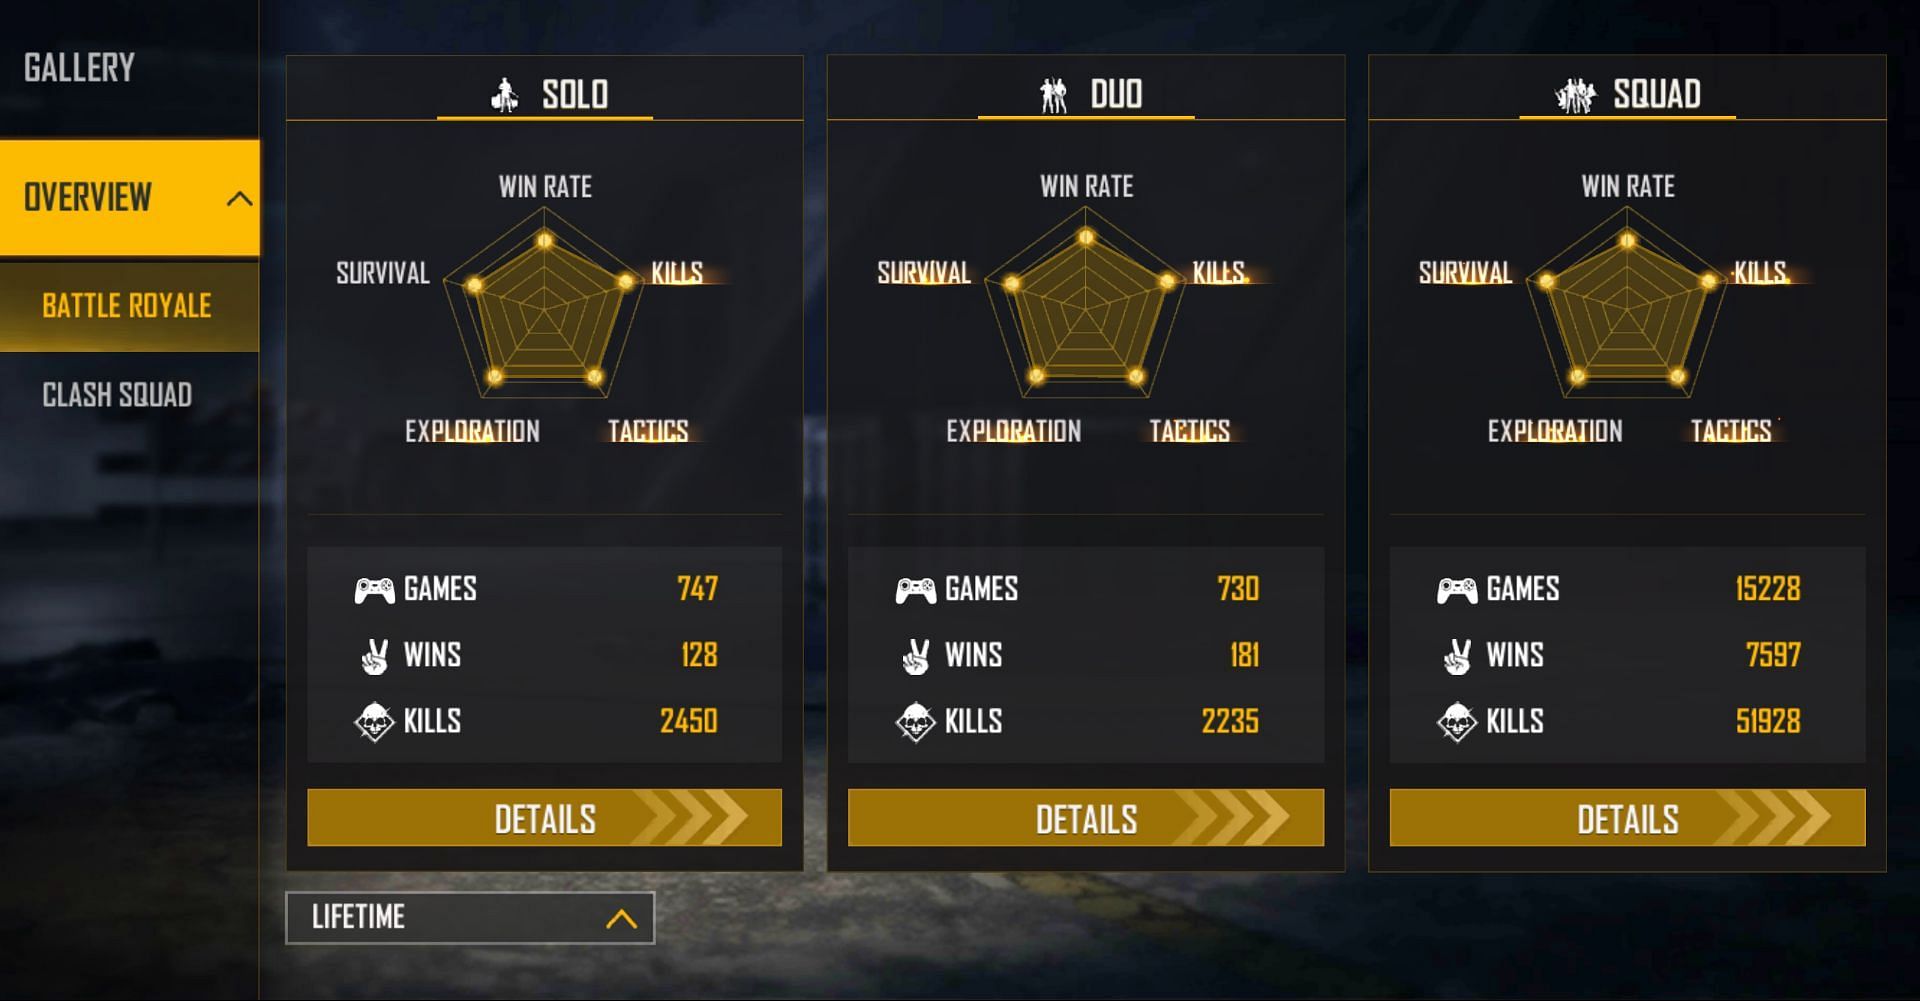 Skylord has a win rate of very close to 50% in squad games (Image via Free Fire)